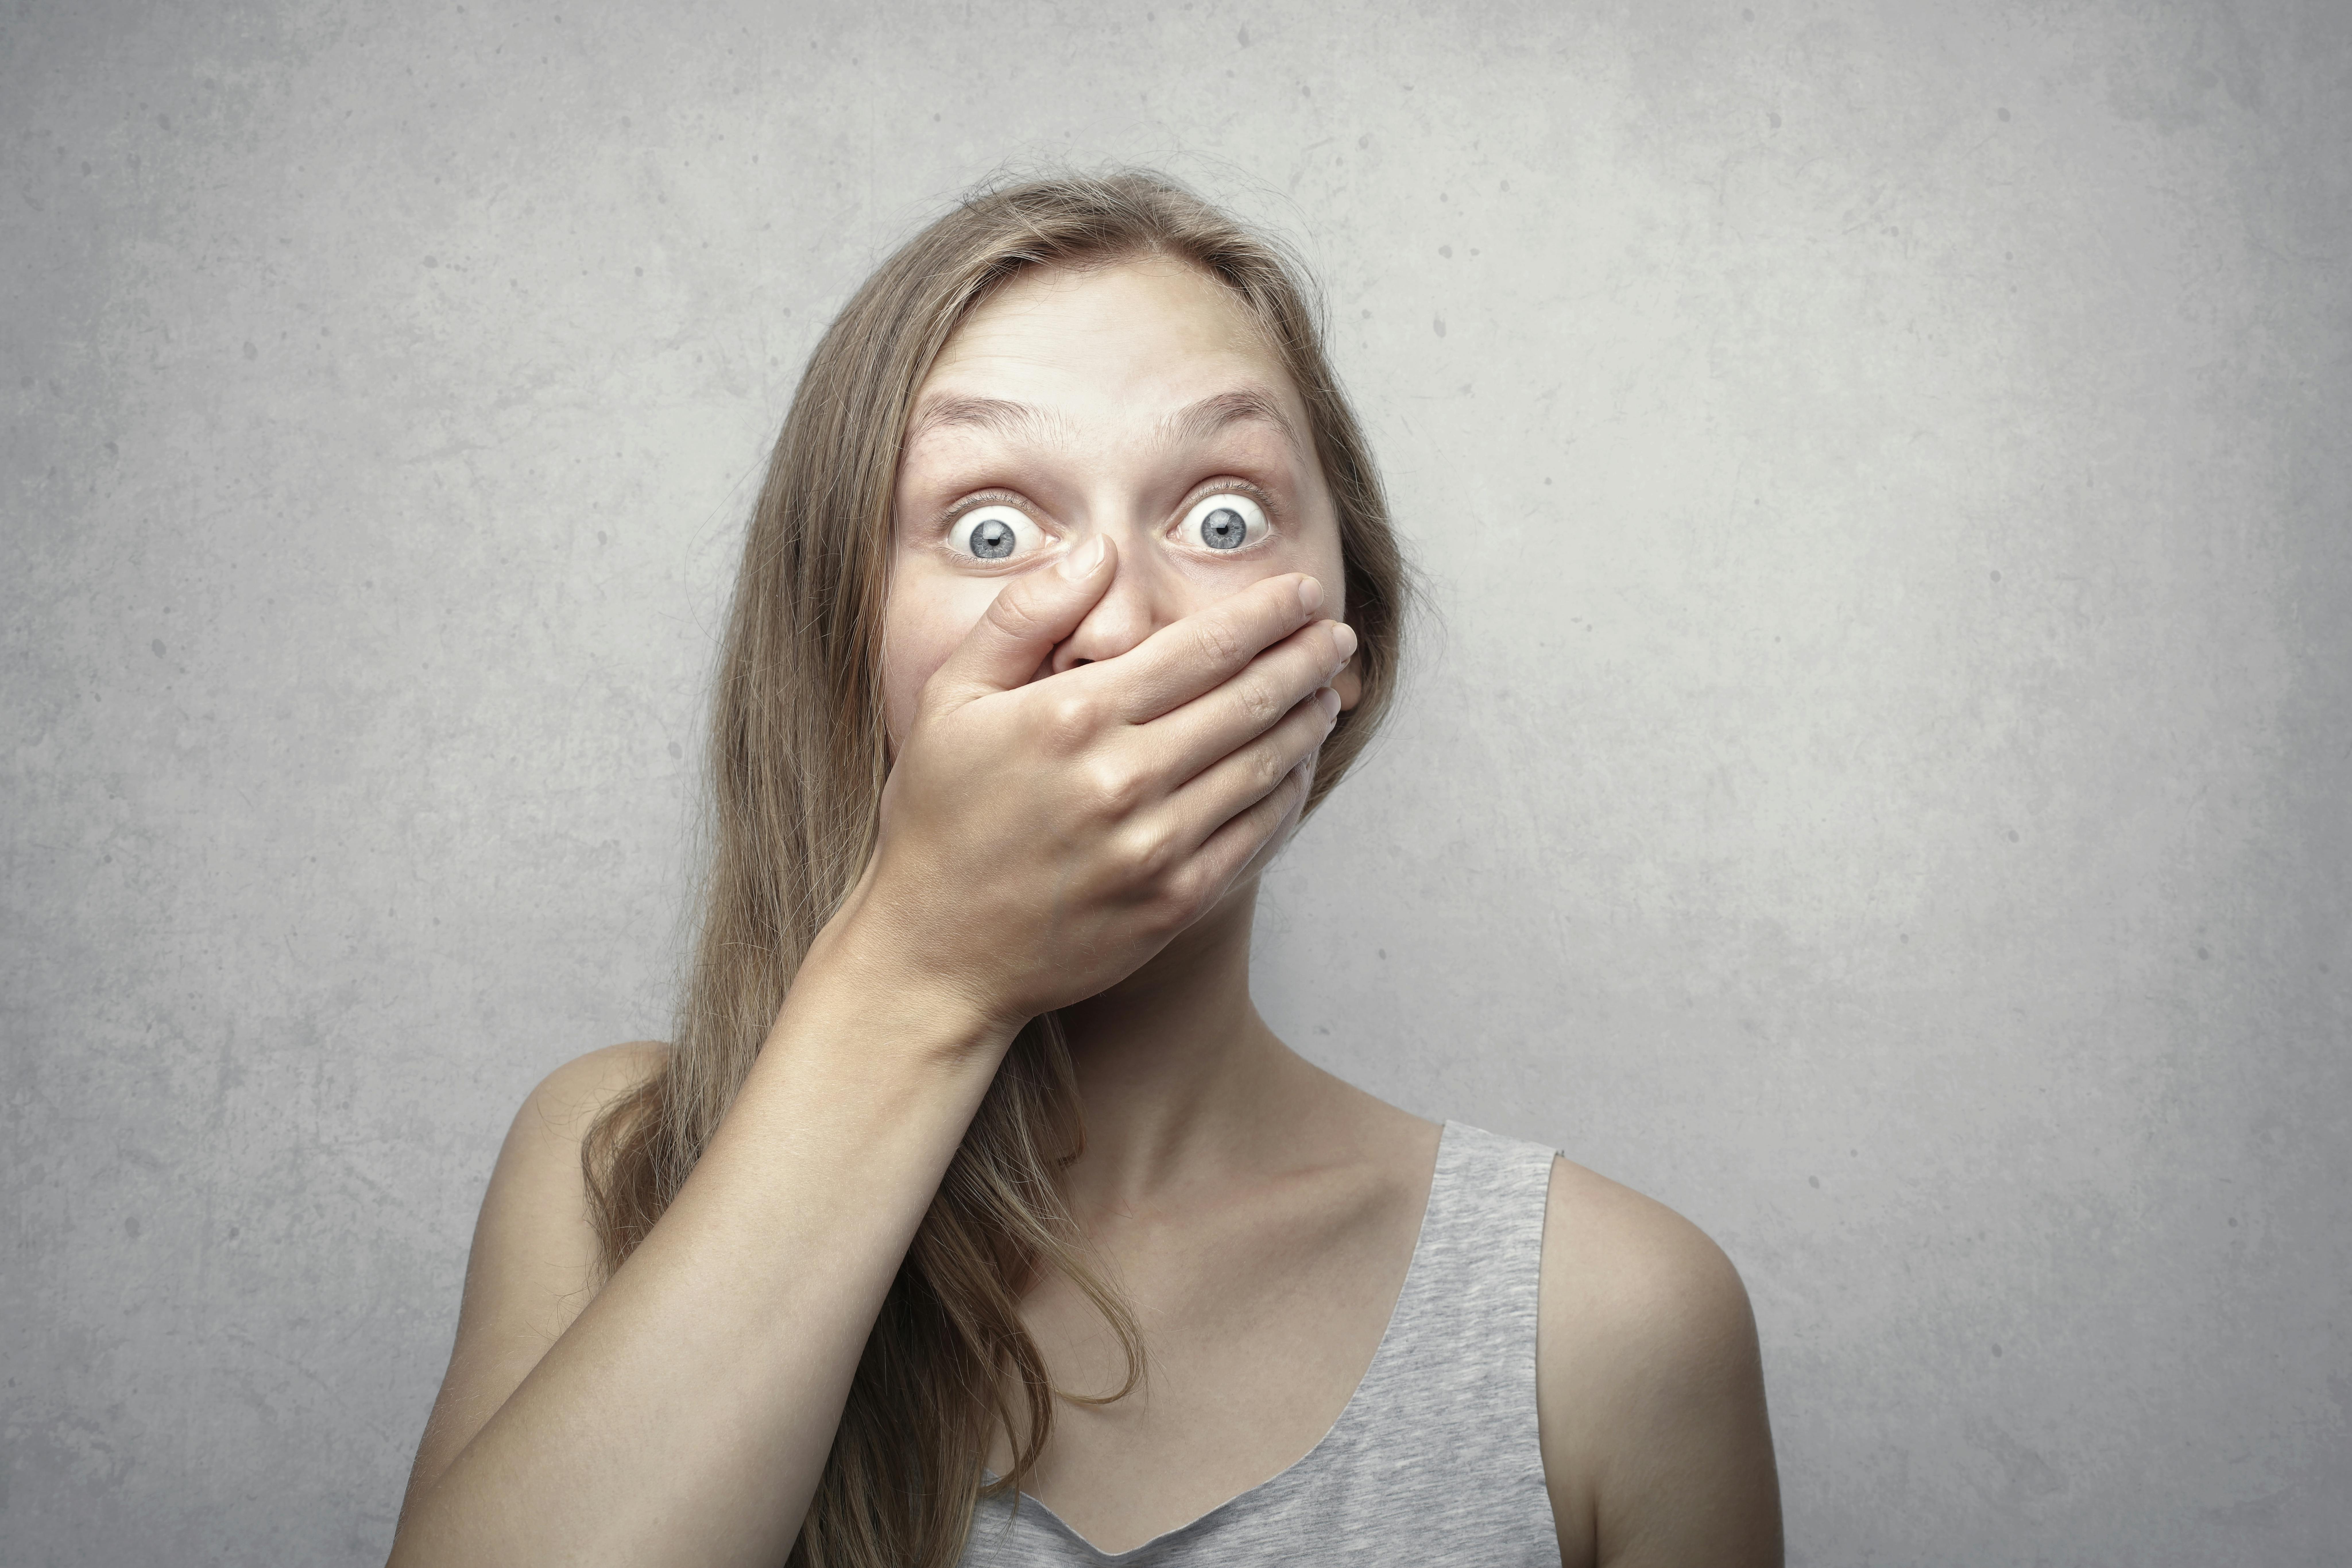 A shocked woman with her hand over her mouth | Source: Pexels